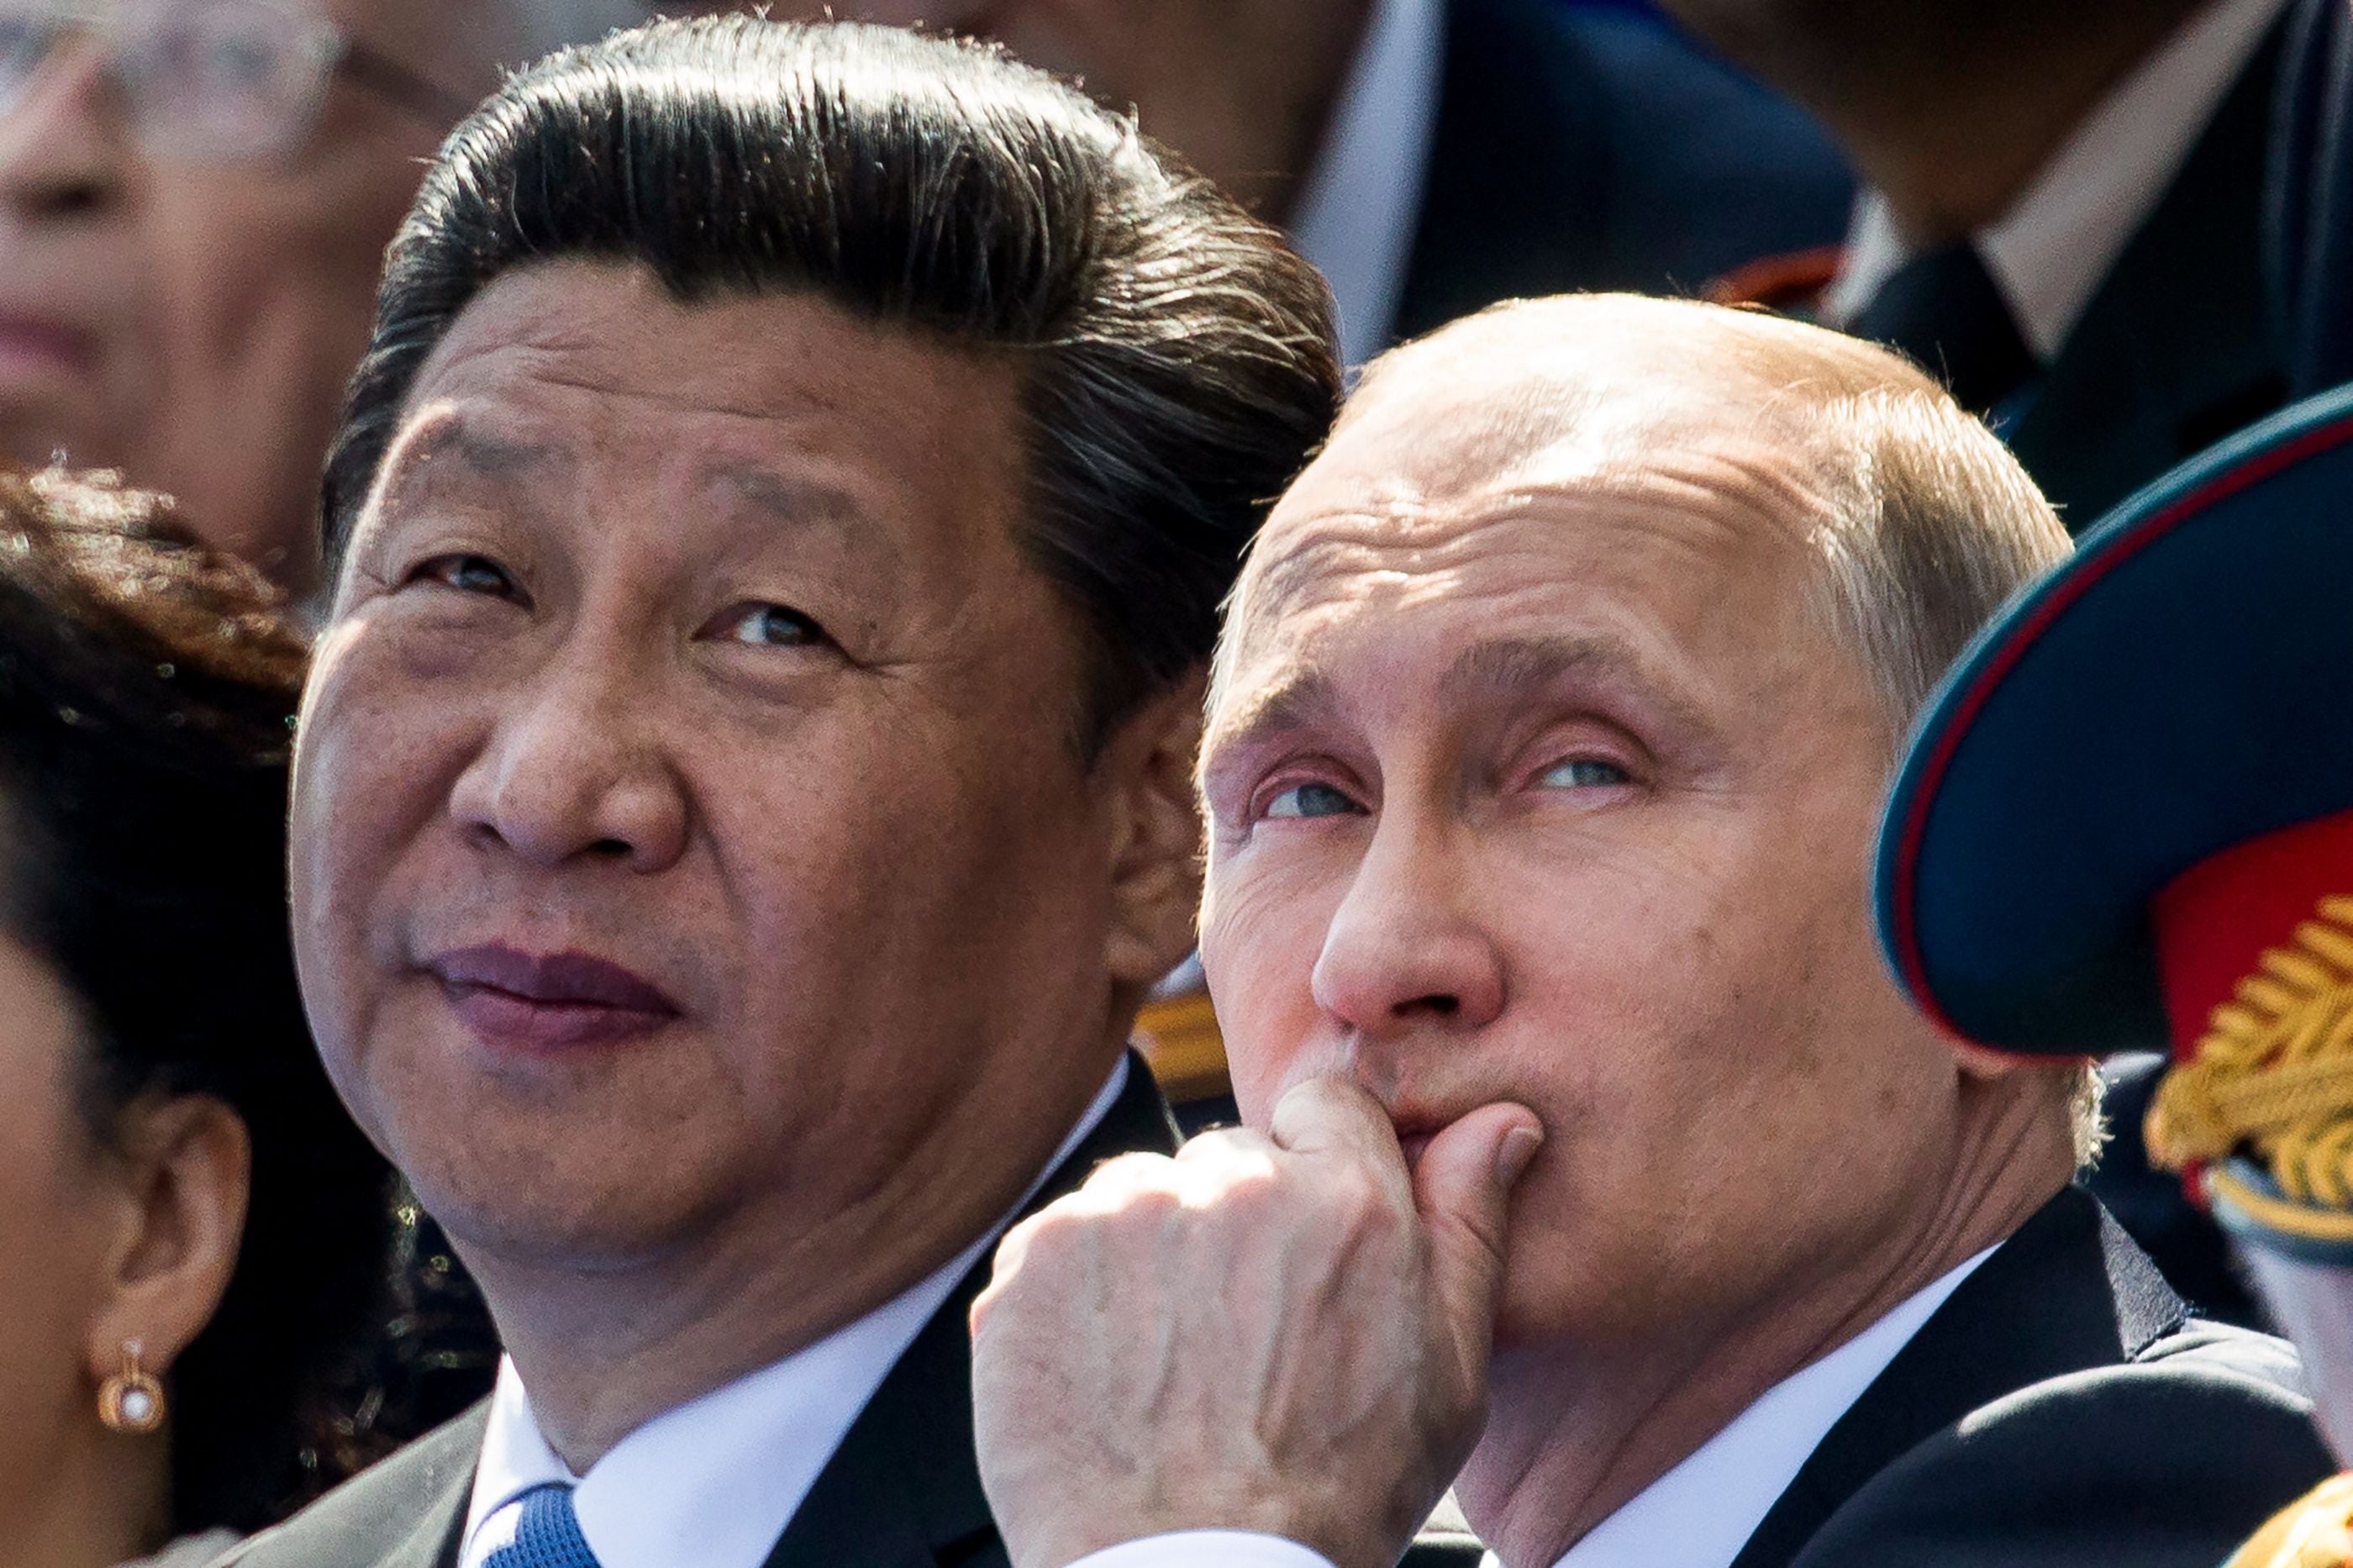 Ukraine Russia latest news: Putin hails China's 'constructive role' in war  ahead of Xi Jinping visit | The Independent